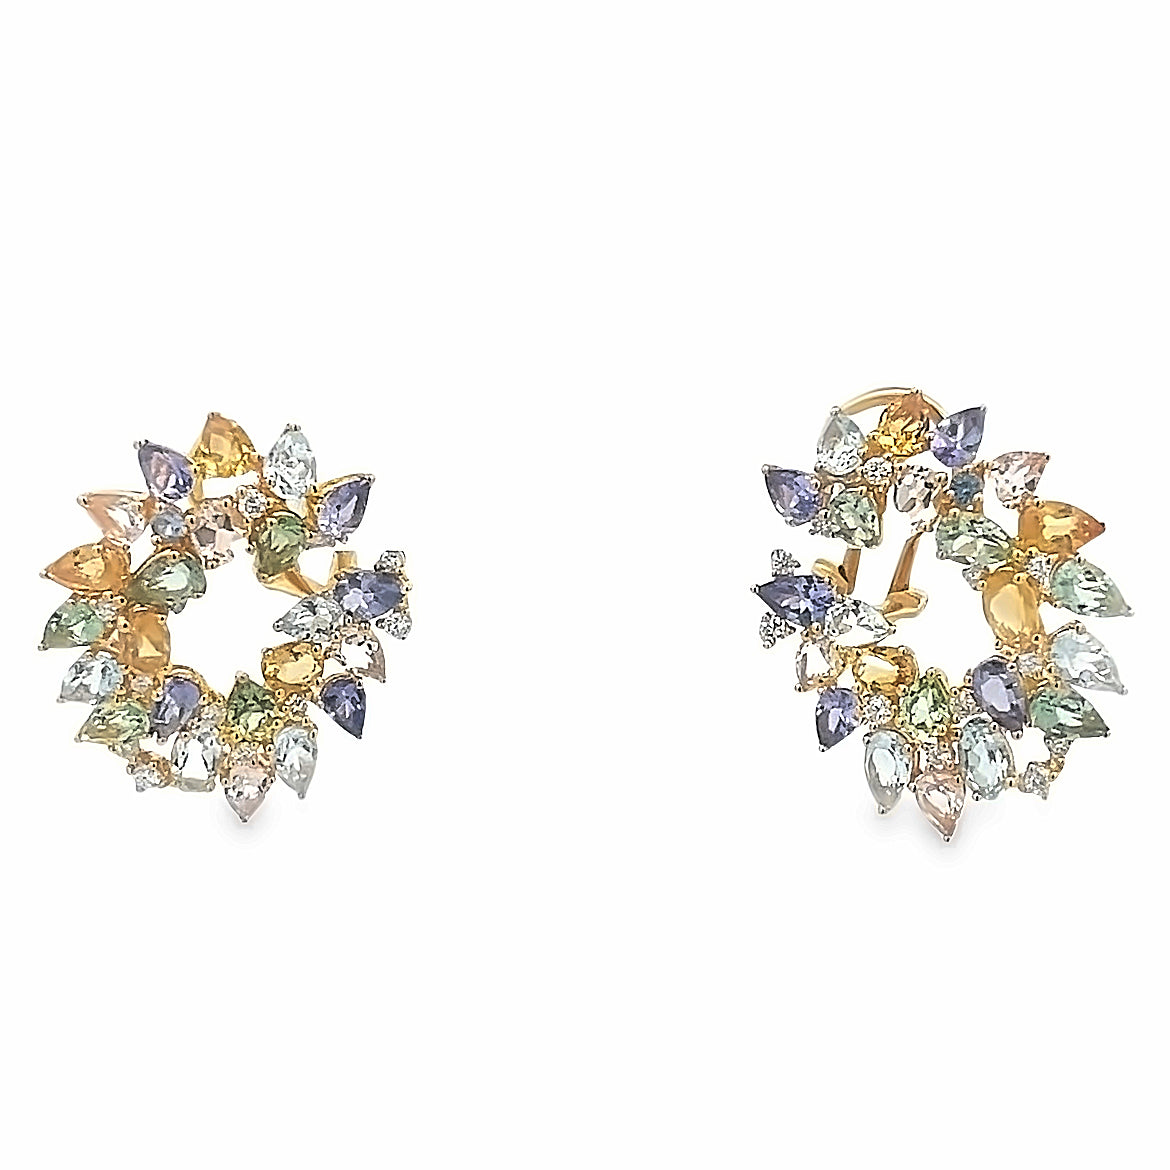 18K GOLD ROUND EARRINGS WITH SAPPHIRES